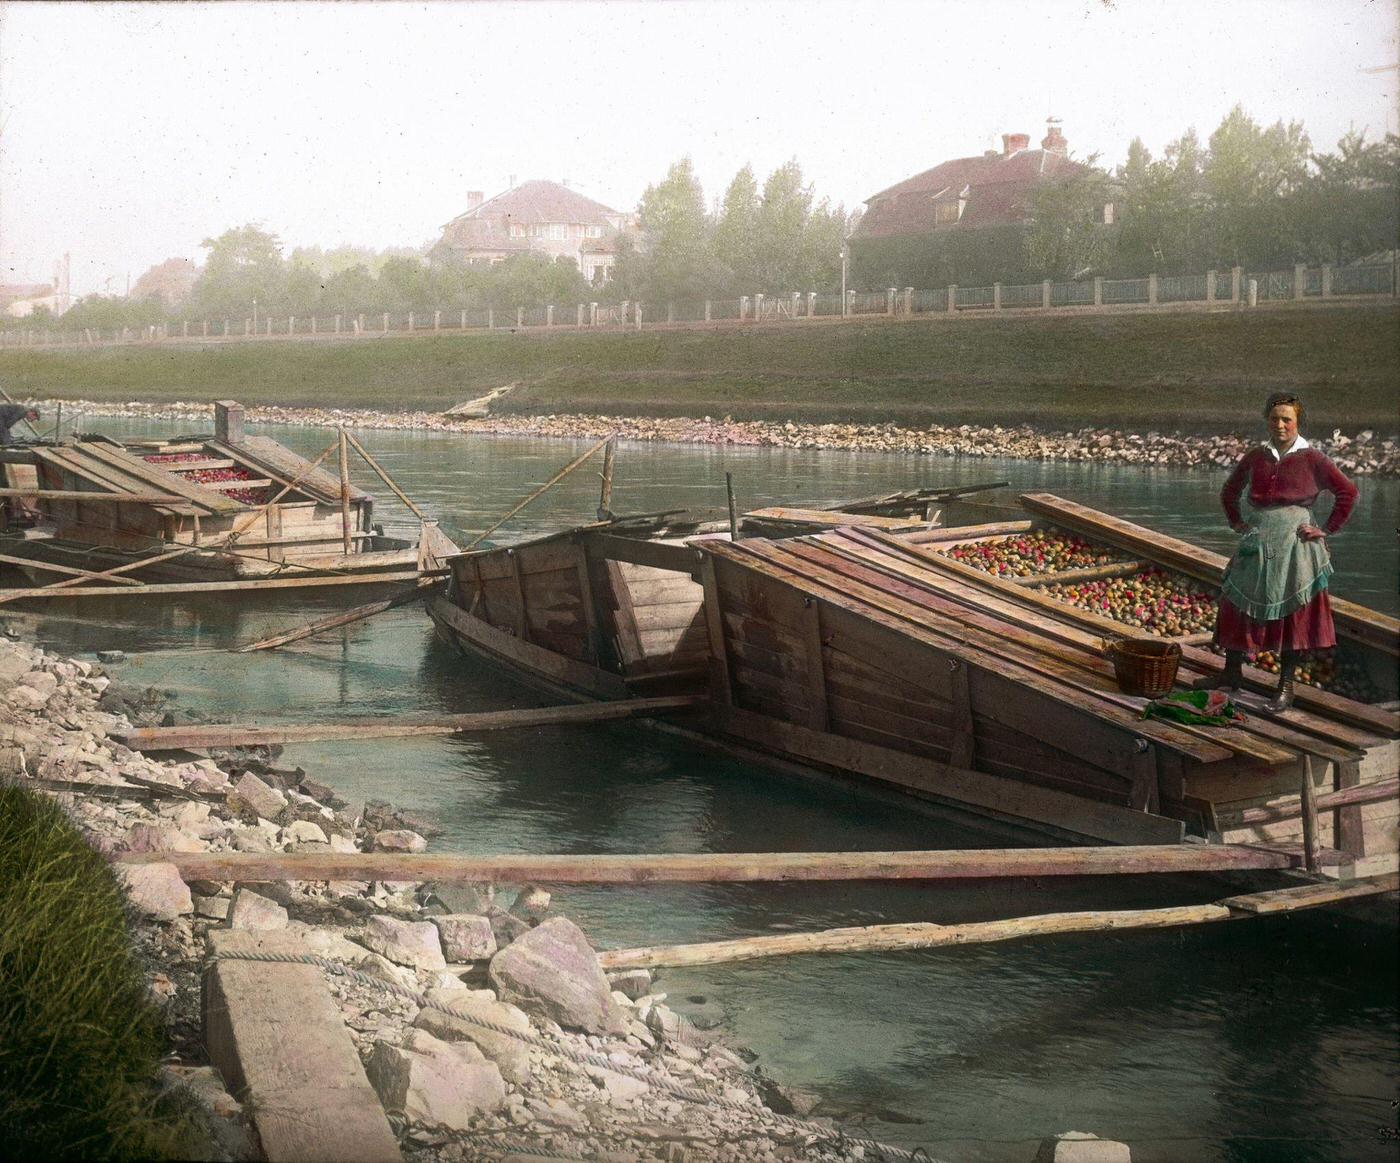 Wooden boat loaded with apples from Upper Austria on the Danube Canal, Vienna, 1905.